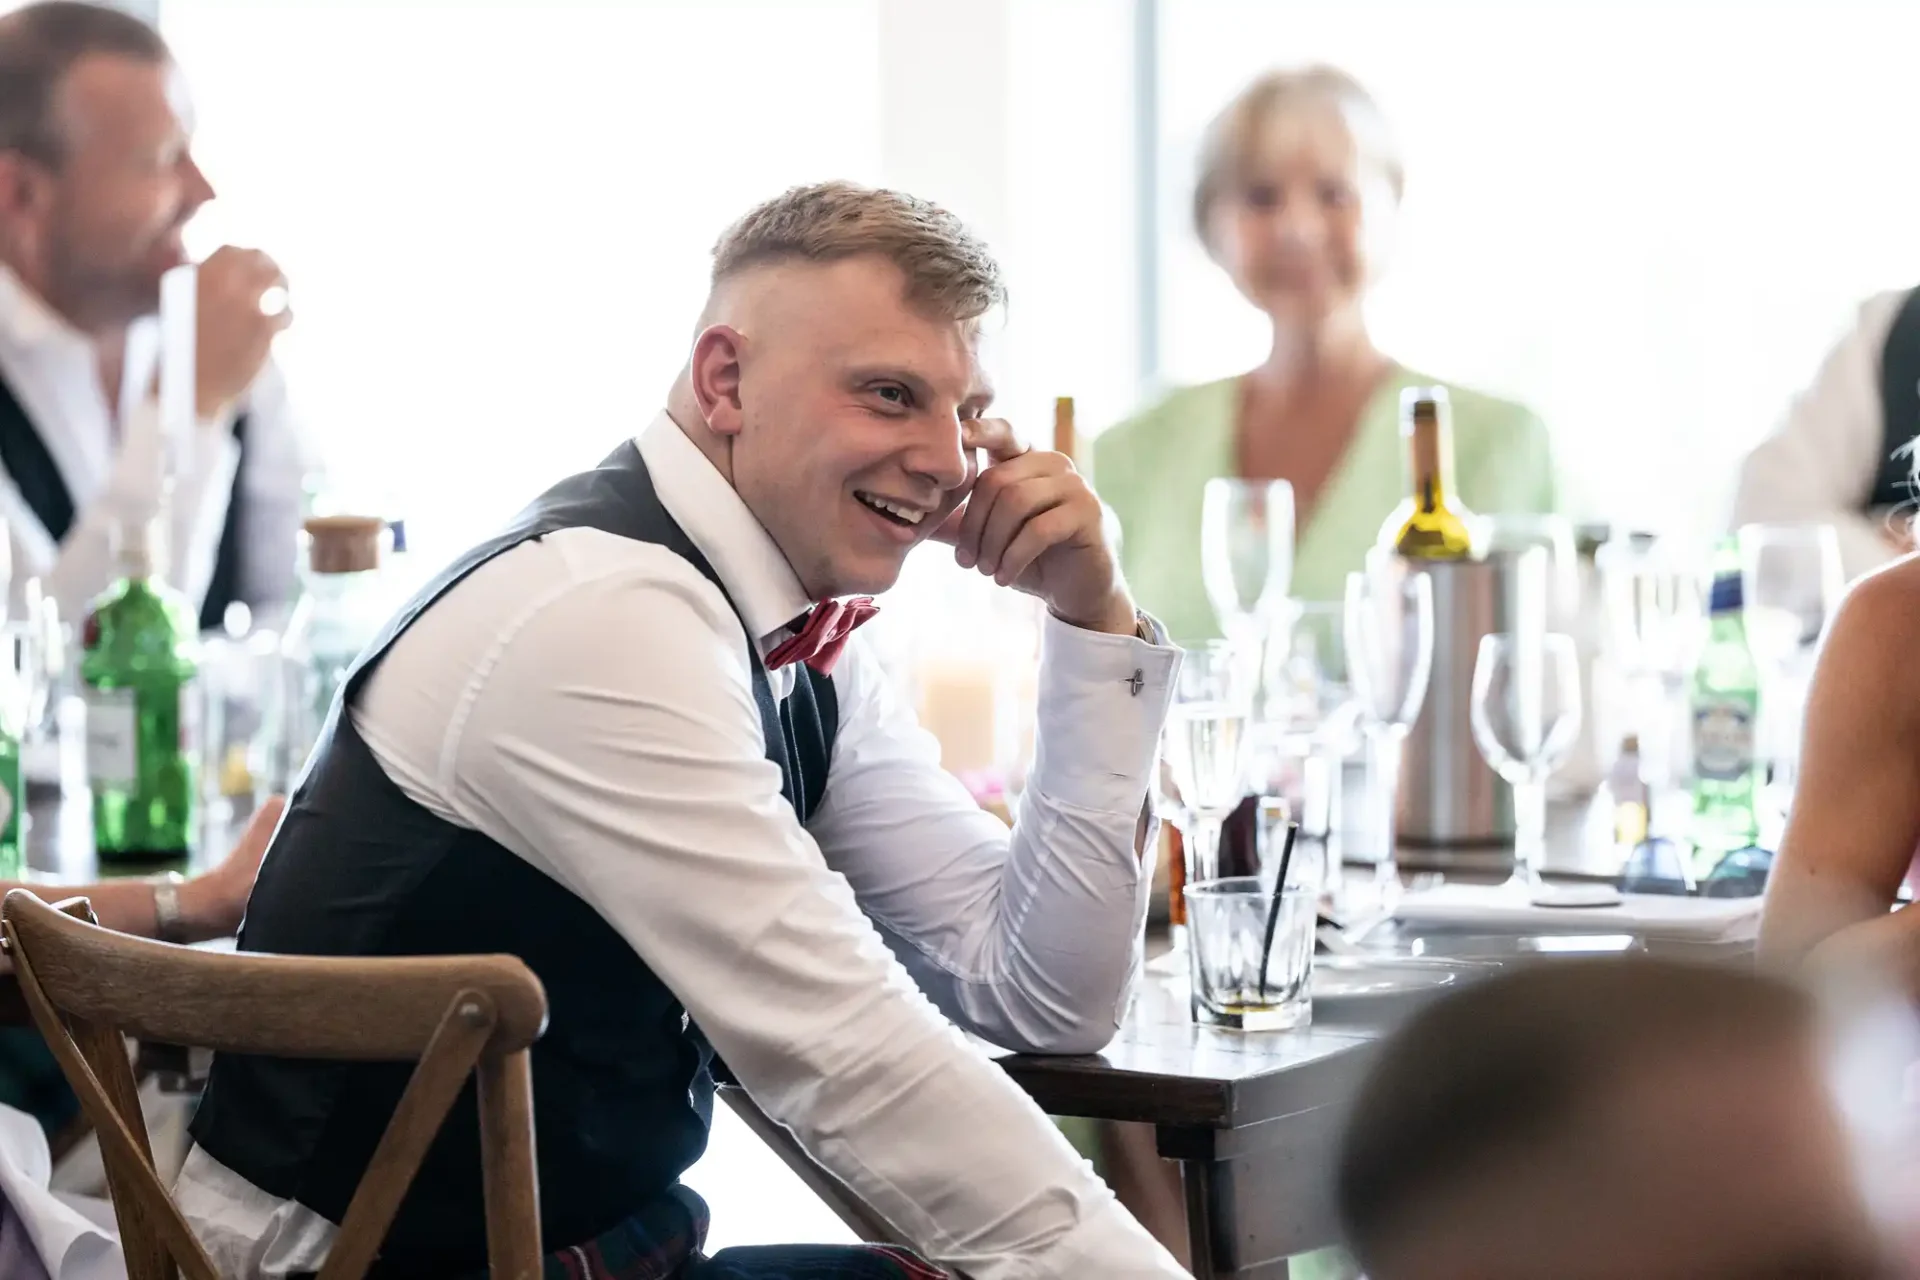 Man in a formal vest and tie smiling and talking on a cellphone at a busy wedding reception table.